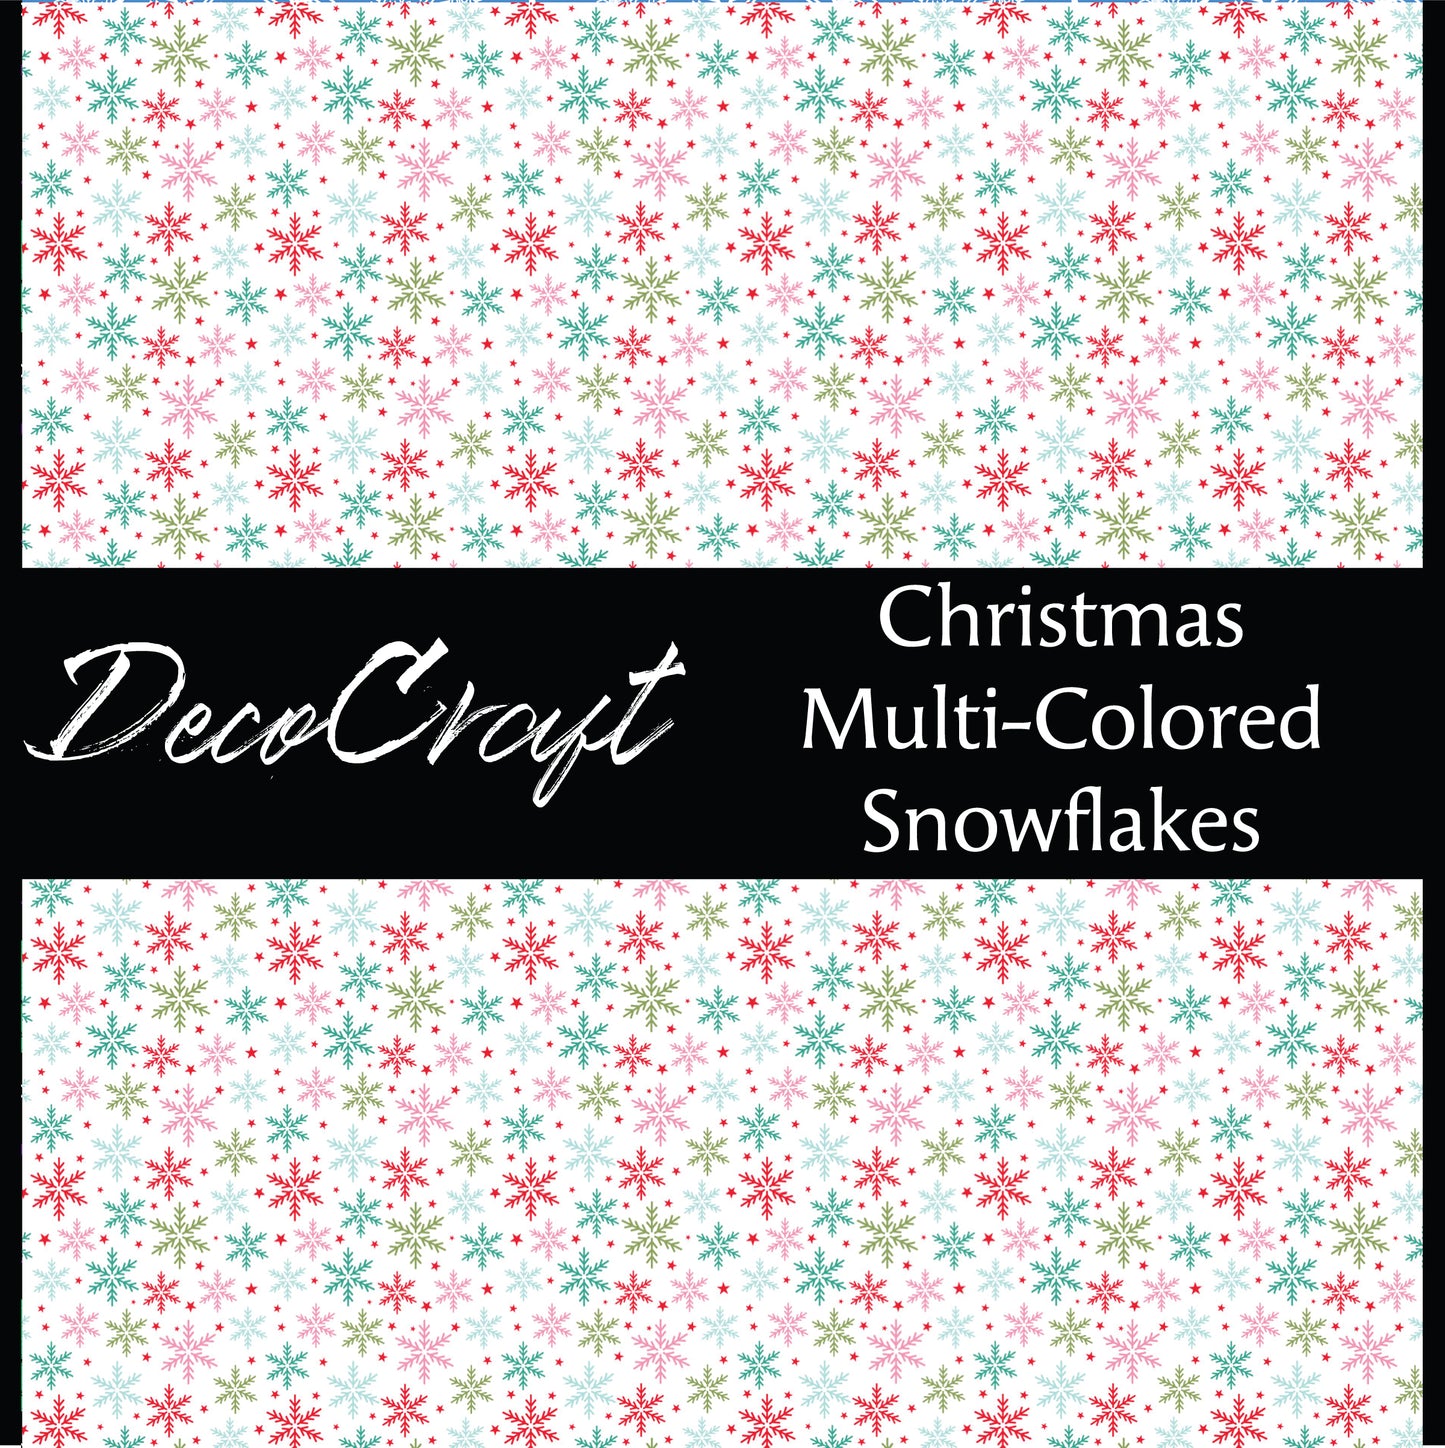 DecoCraft Christmas - Multi-Colored Snowflakes